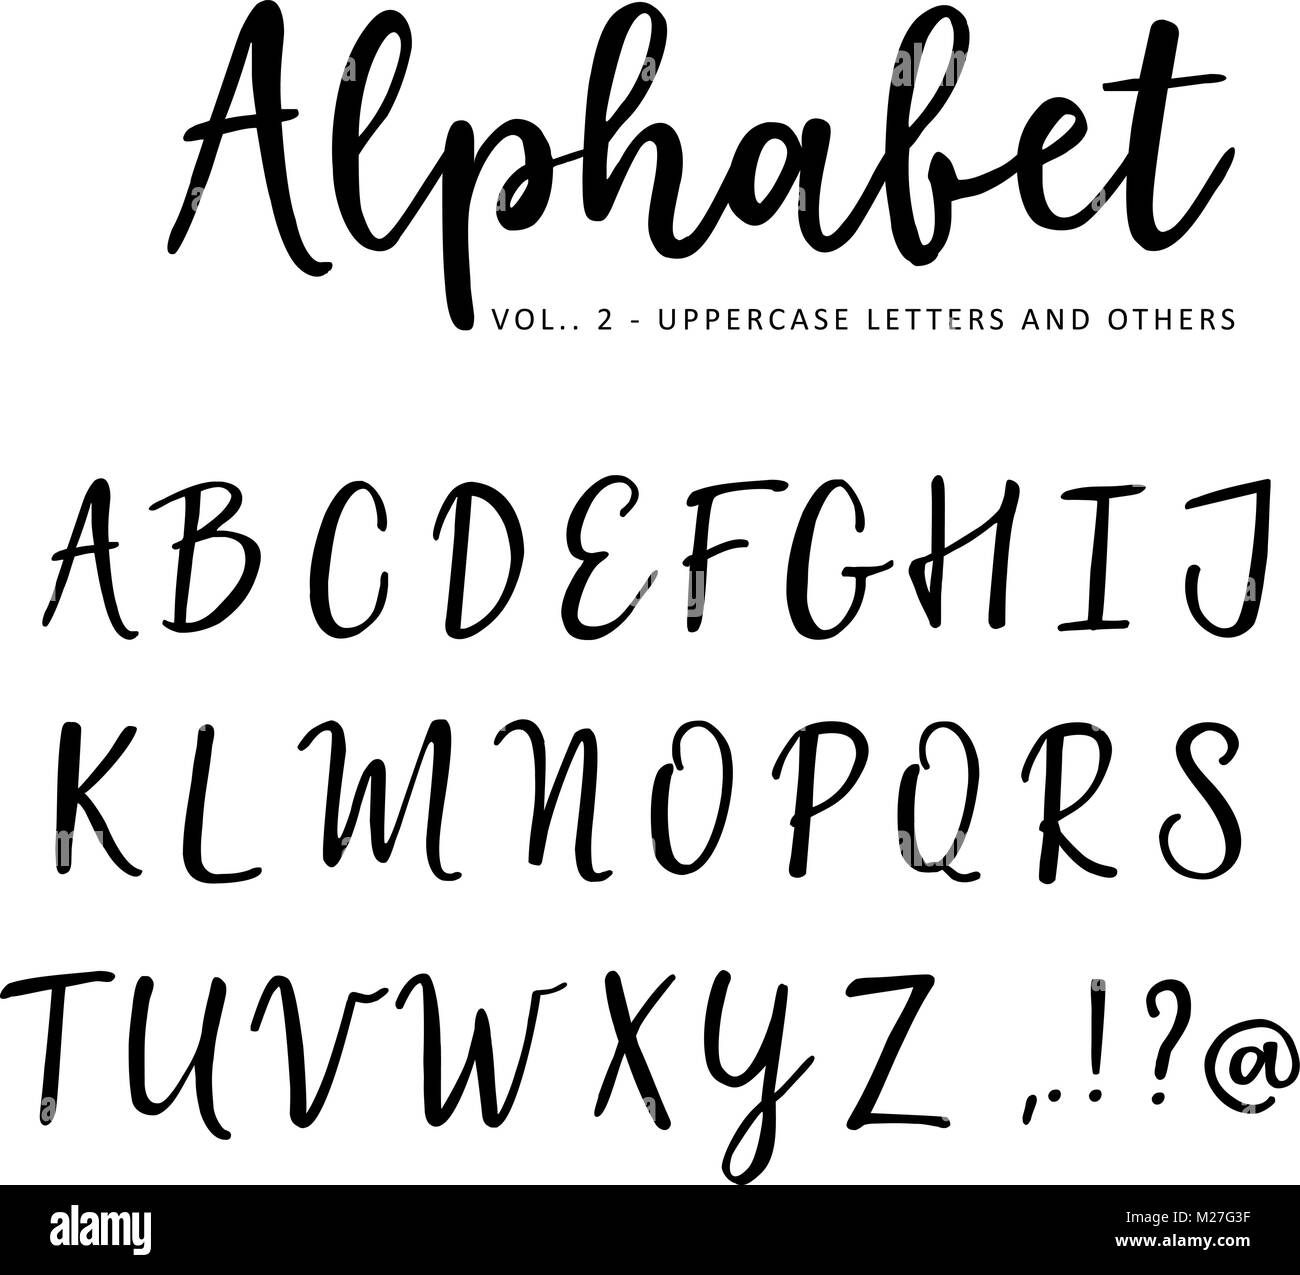 Hand drawn vector alphabet. Brush script font. Isolated upper case letters written with marker, ink. Calligraphy, lettering. Stock Vector